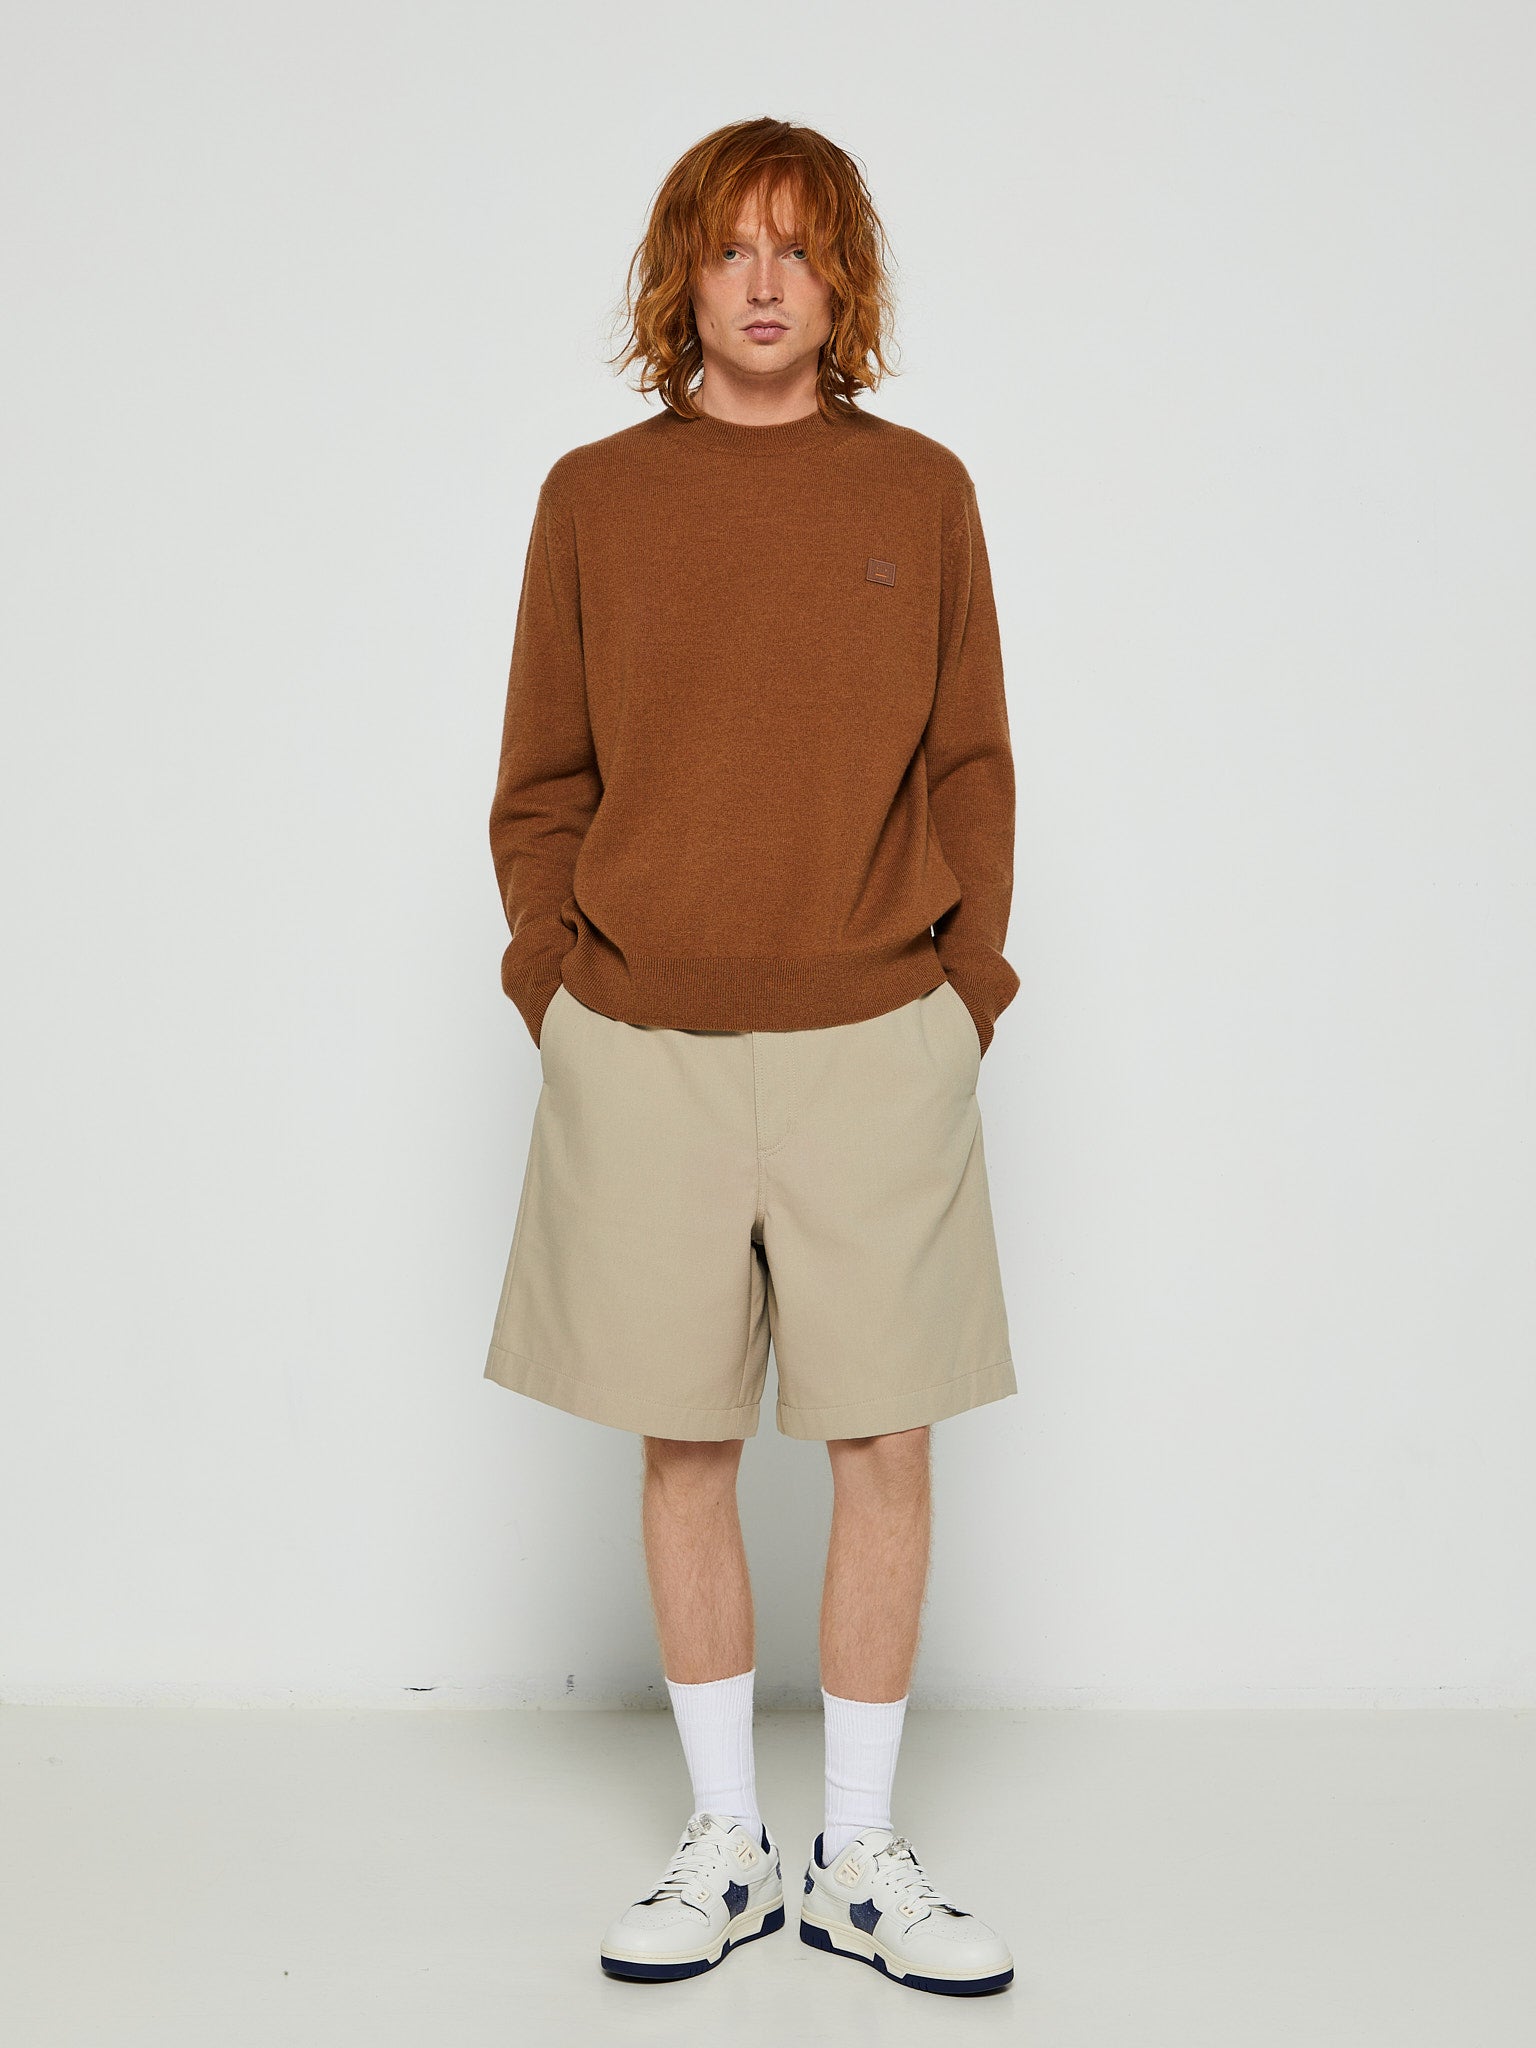 Crew Neck Sweater in Toffee Brown